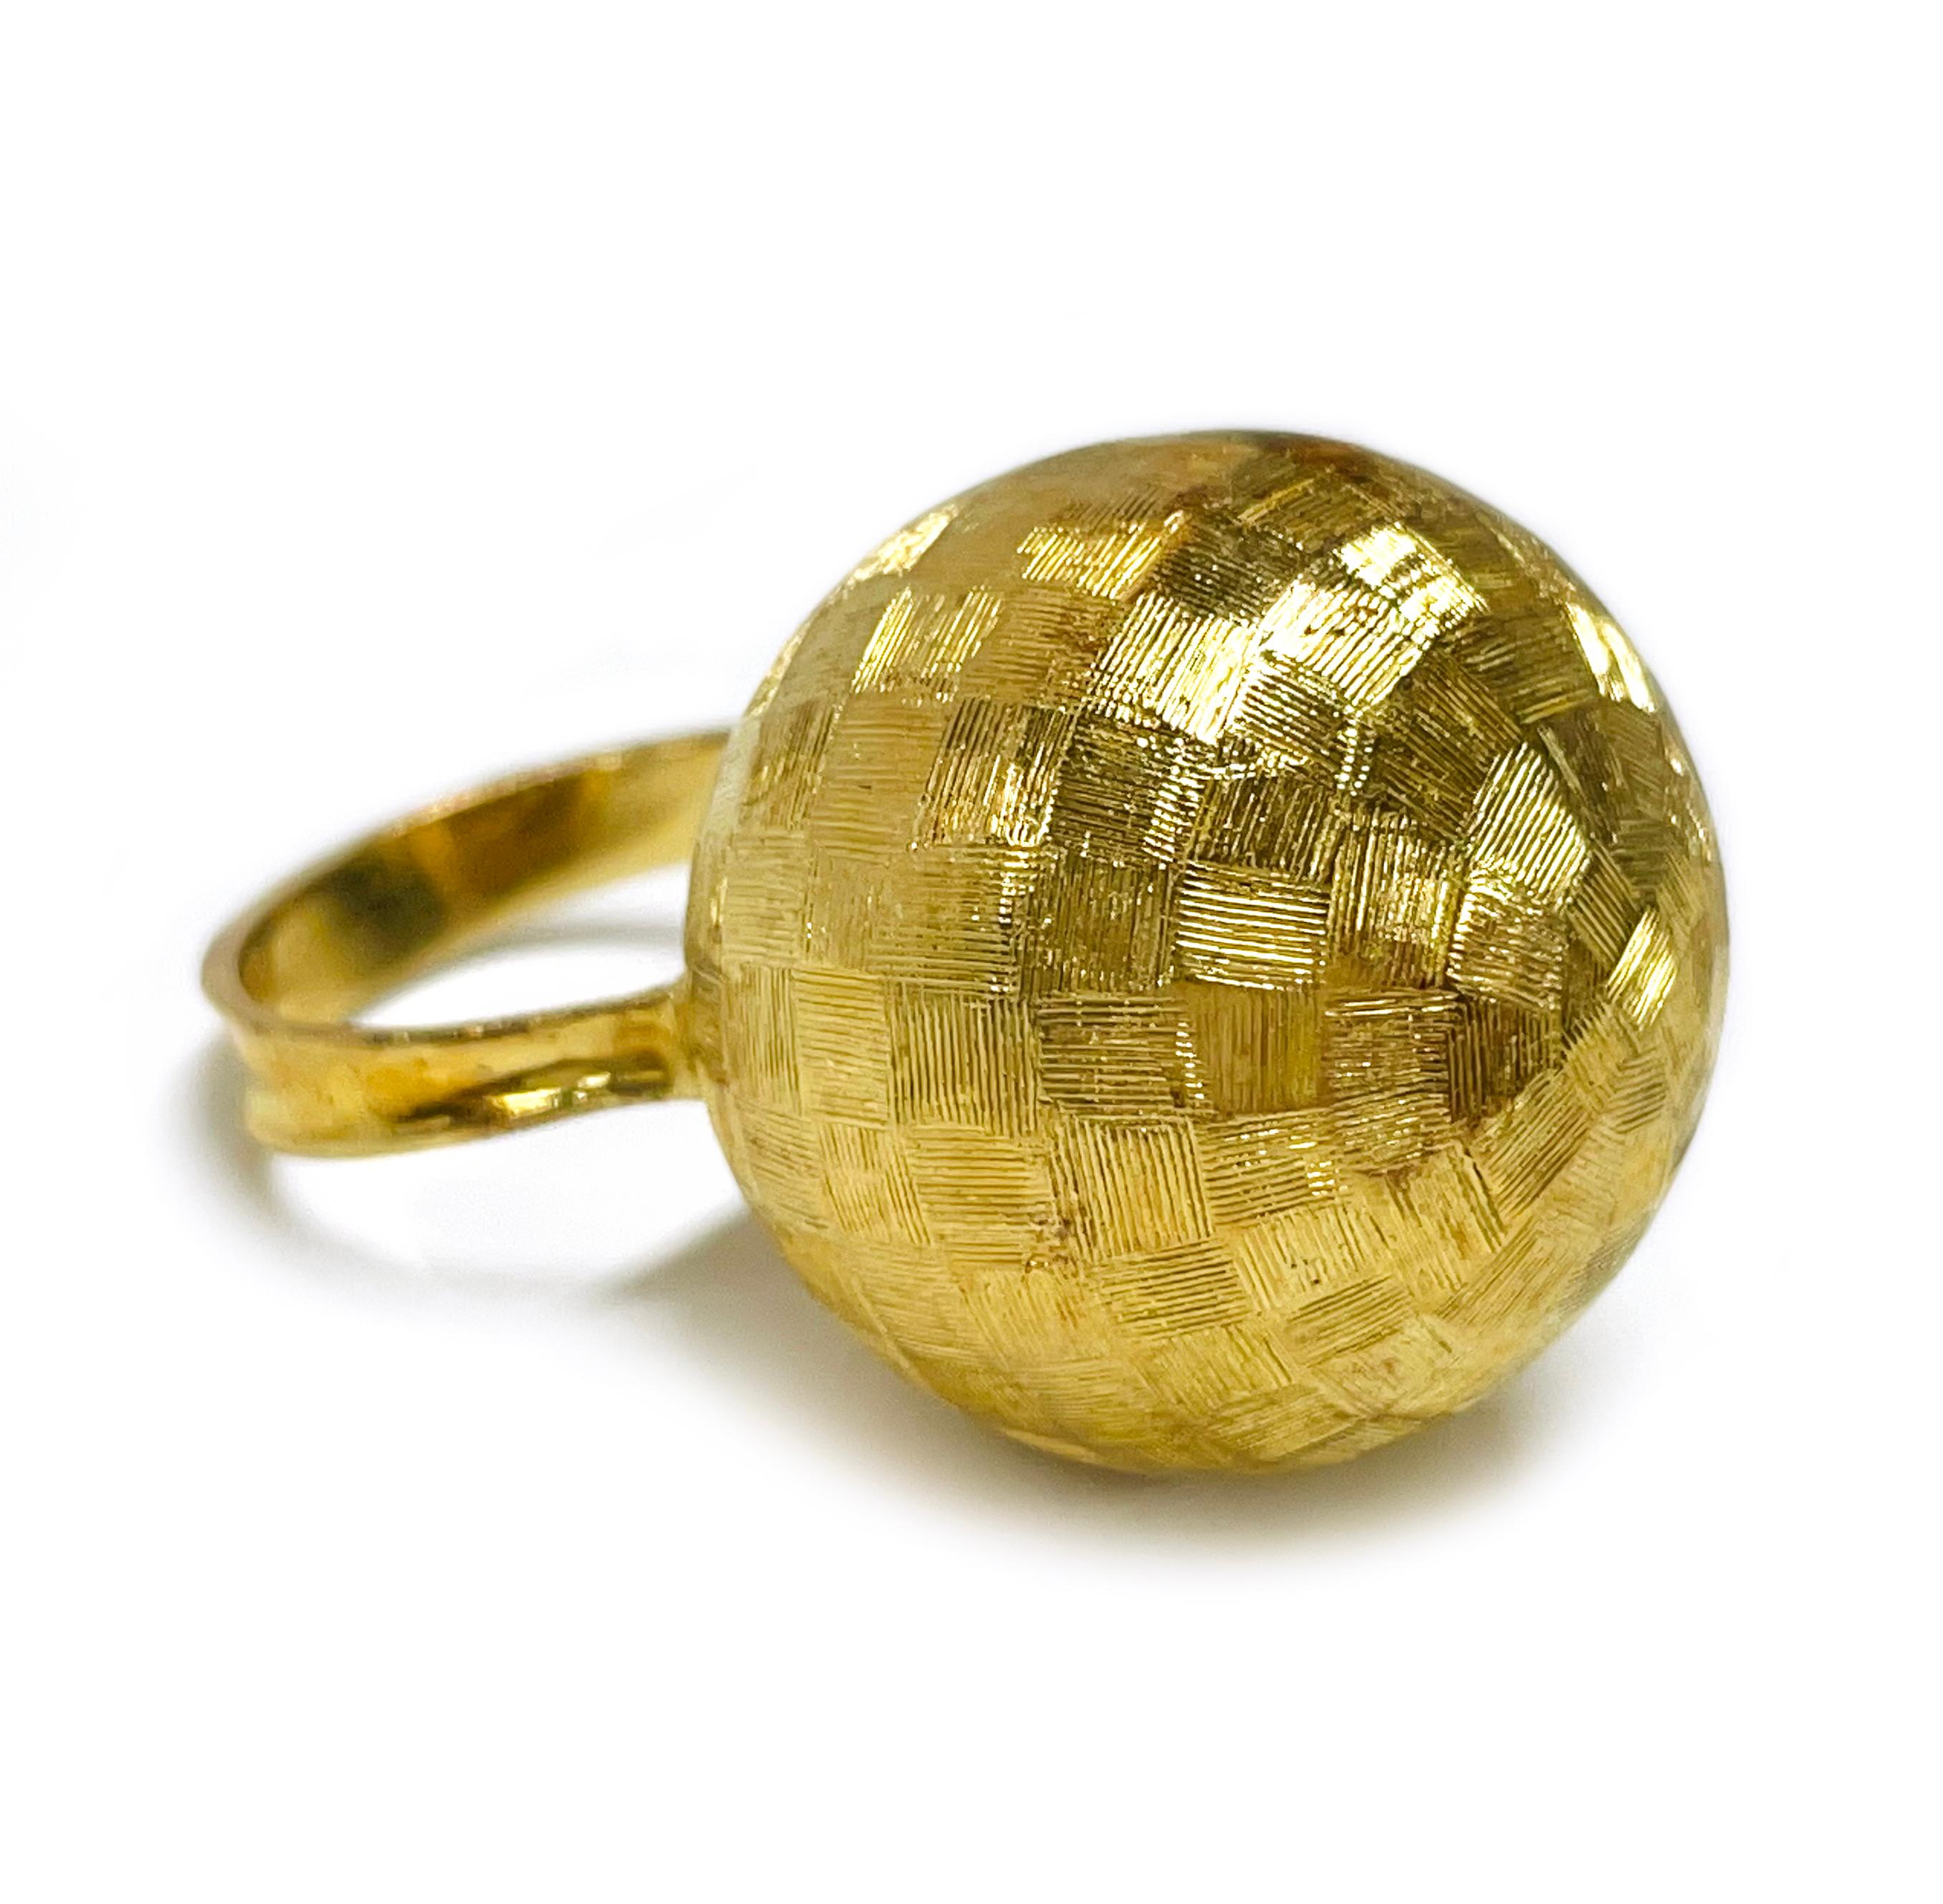 18 Karat Yellow Gold Checkerboard Pattern Dome Ring. The ring features a curved tapered band with a large sphere atop. The hollow sphere has a checkboard pattern and measures 21.7mm in diameter. The ring size is 7 1/4. The total weight of the ring